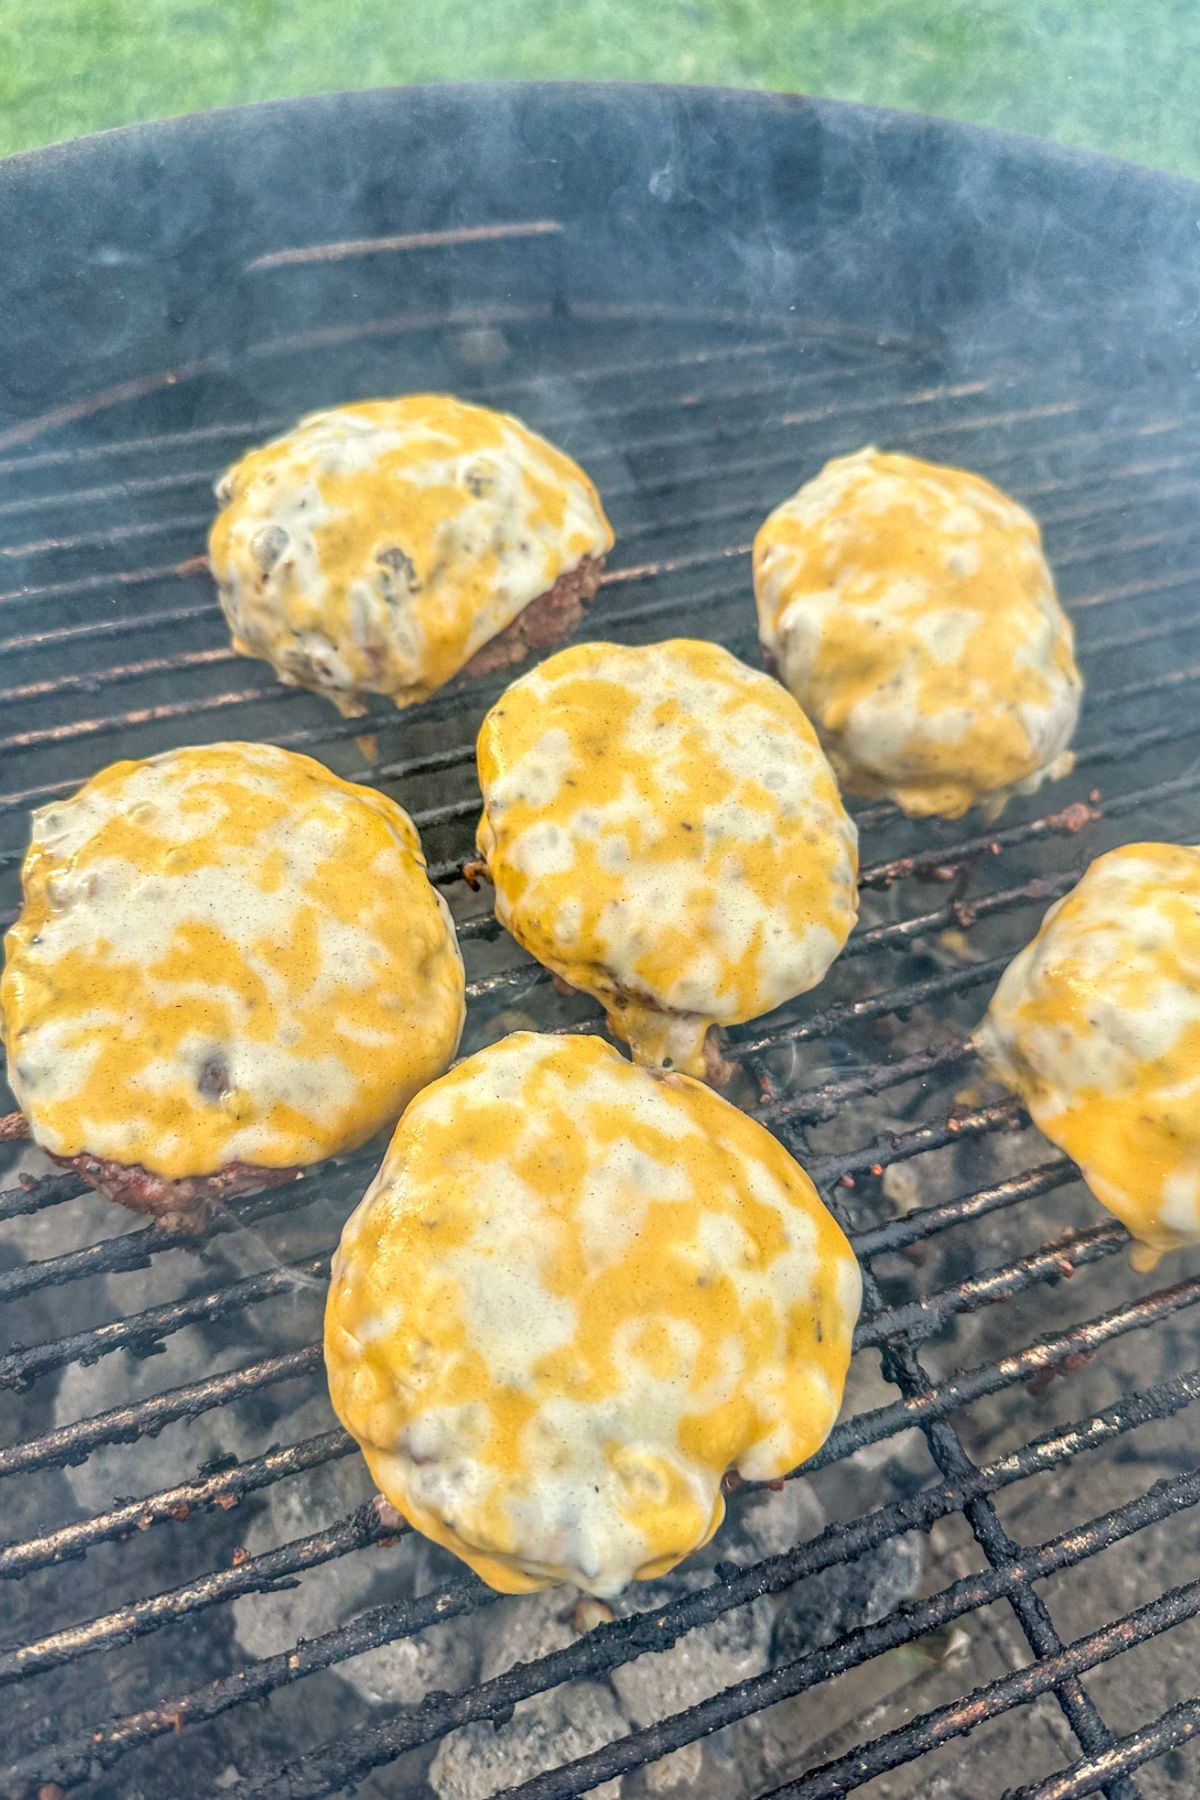 Rodeo Burger patties on the grill with melted cheese.